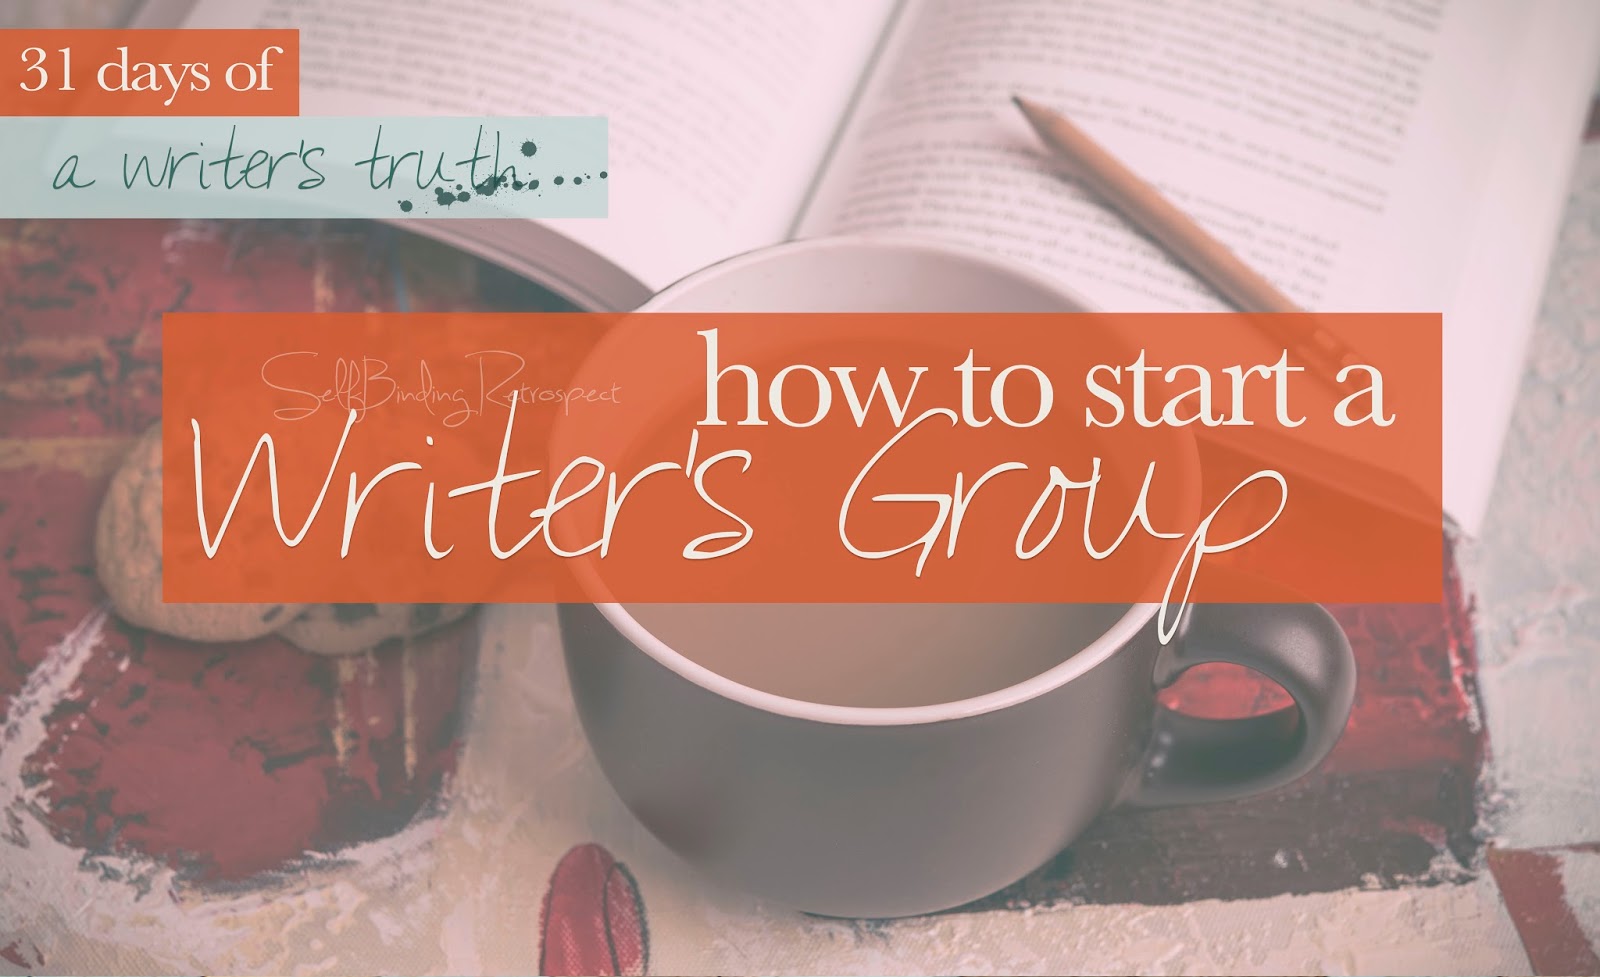 How to start a writer's group #write31days